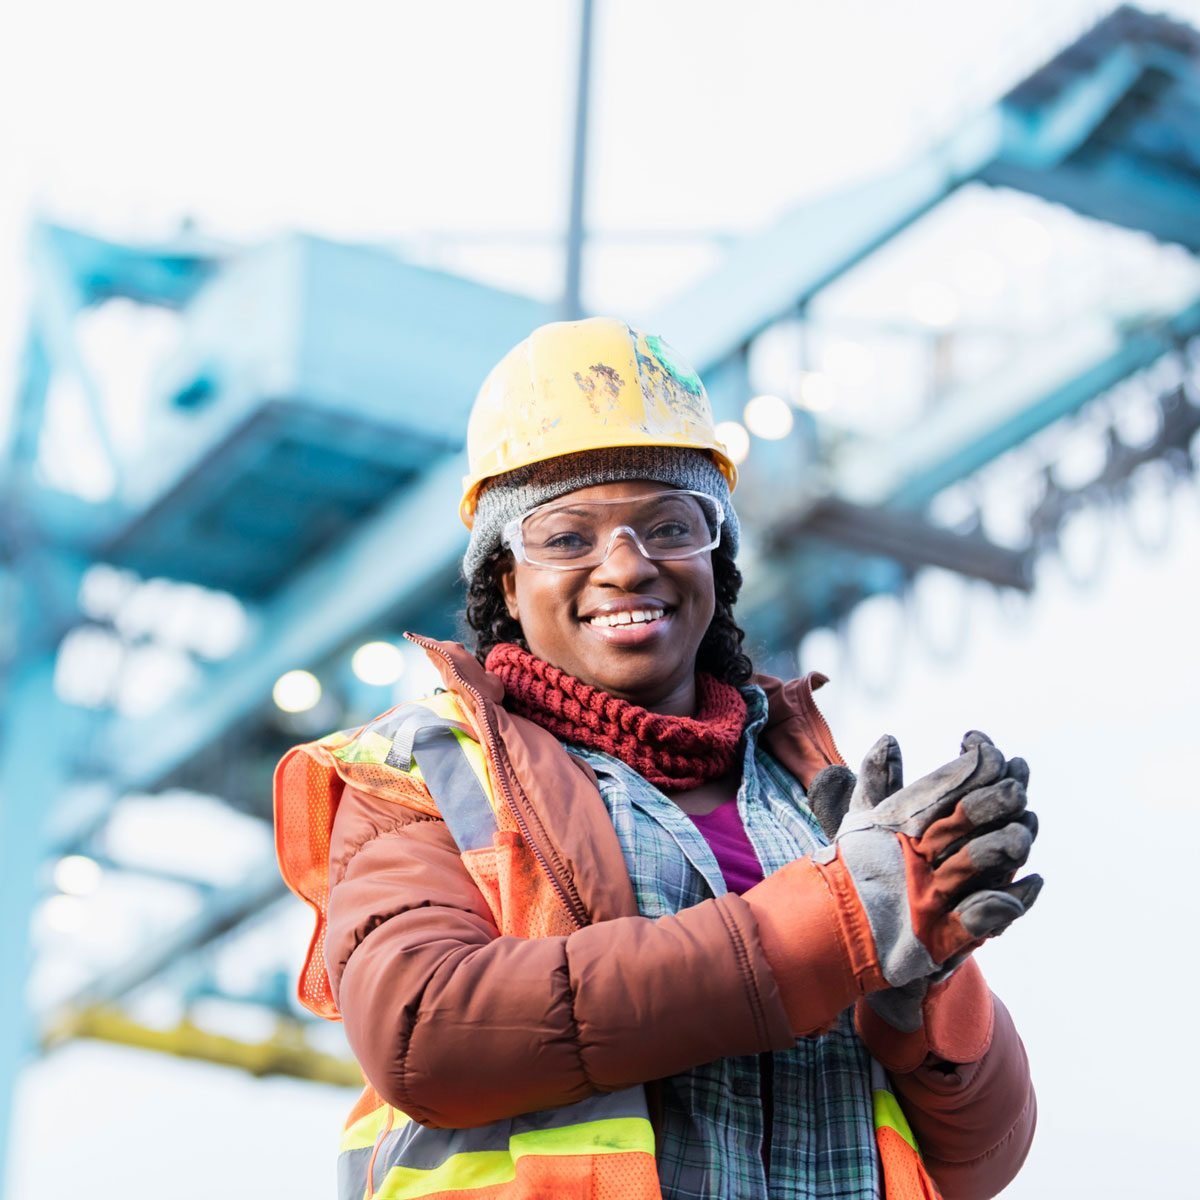 Why More Women Are Considering Careers in the Trades